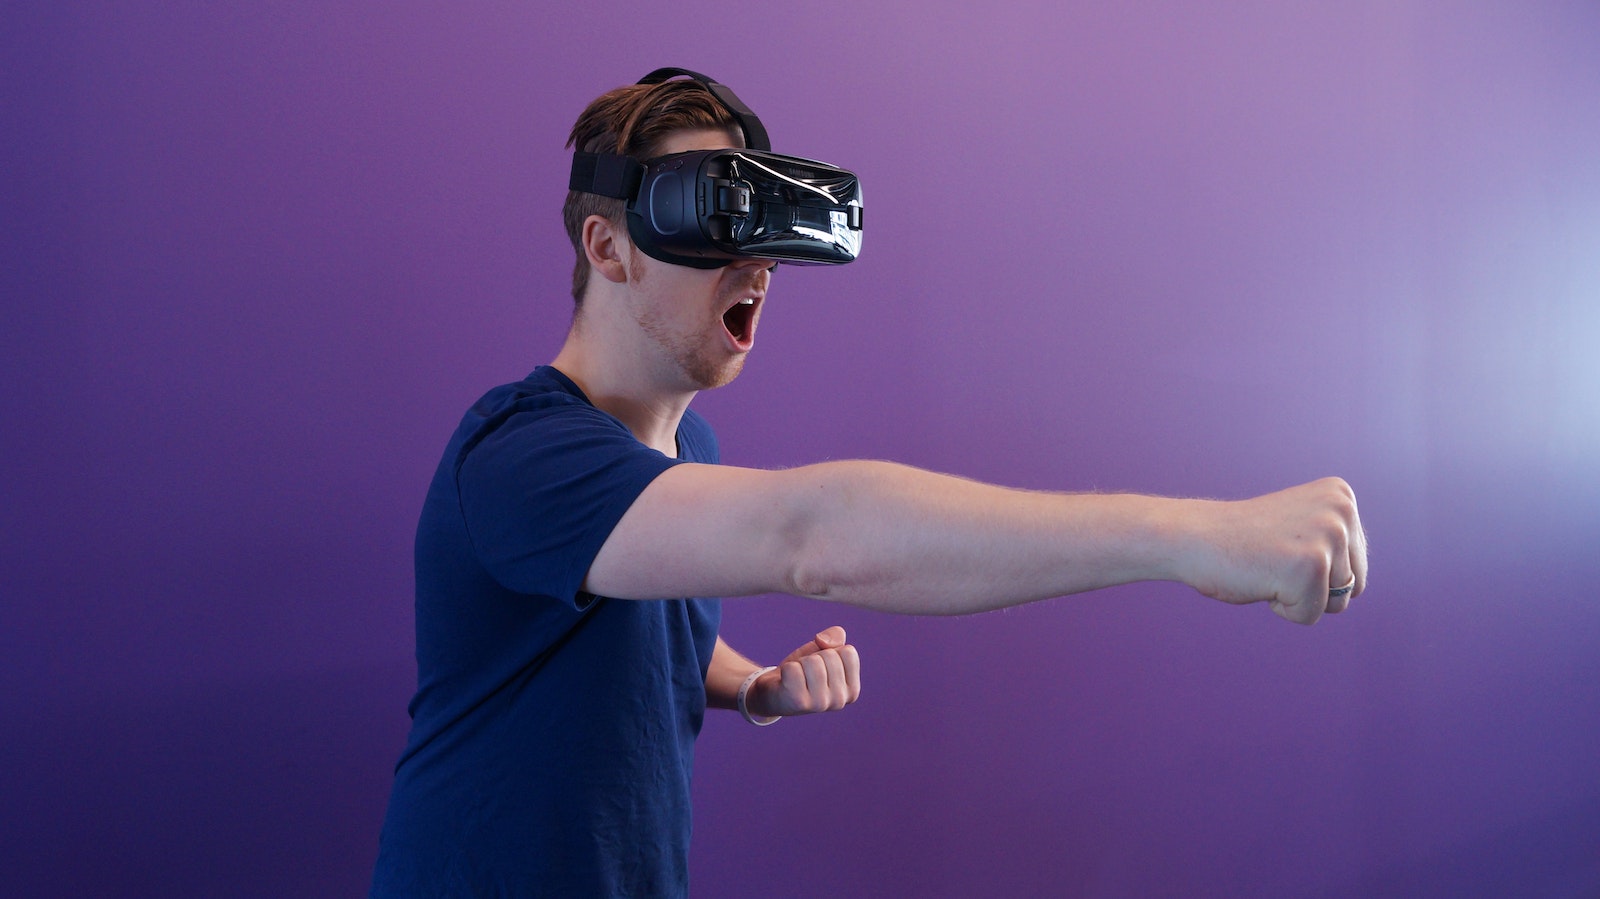 Man Punching in the Air while in VR Goggles